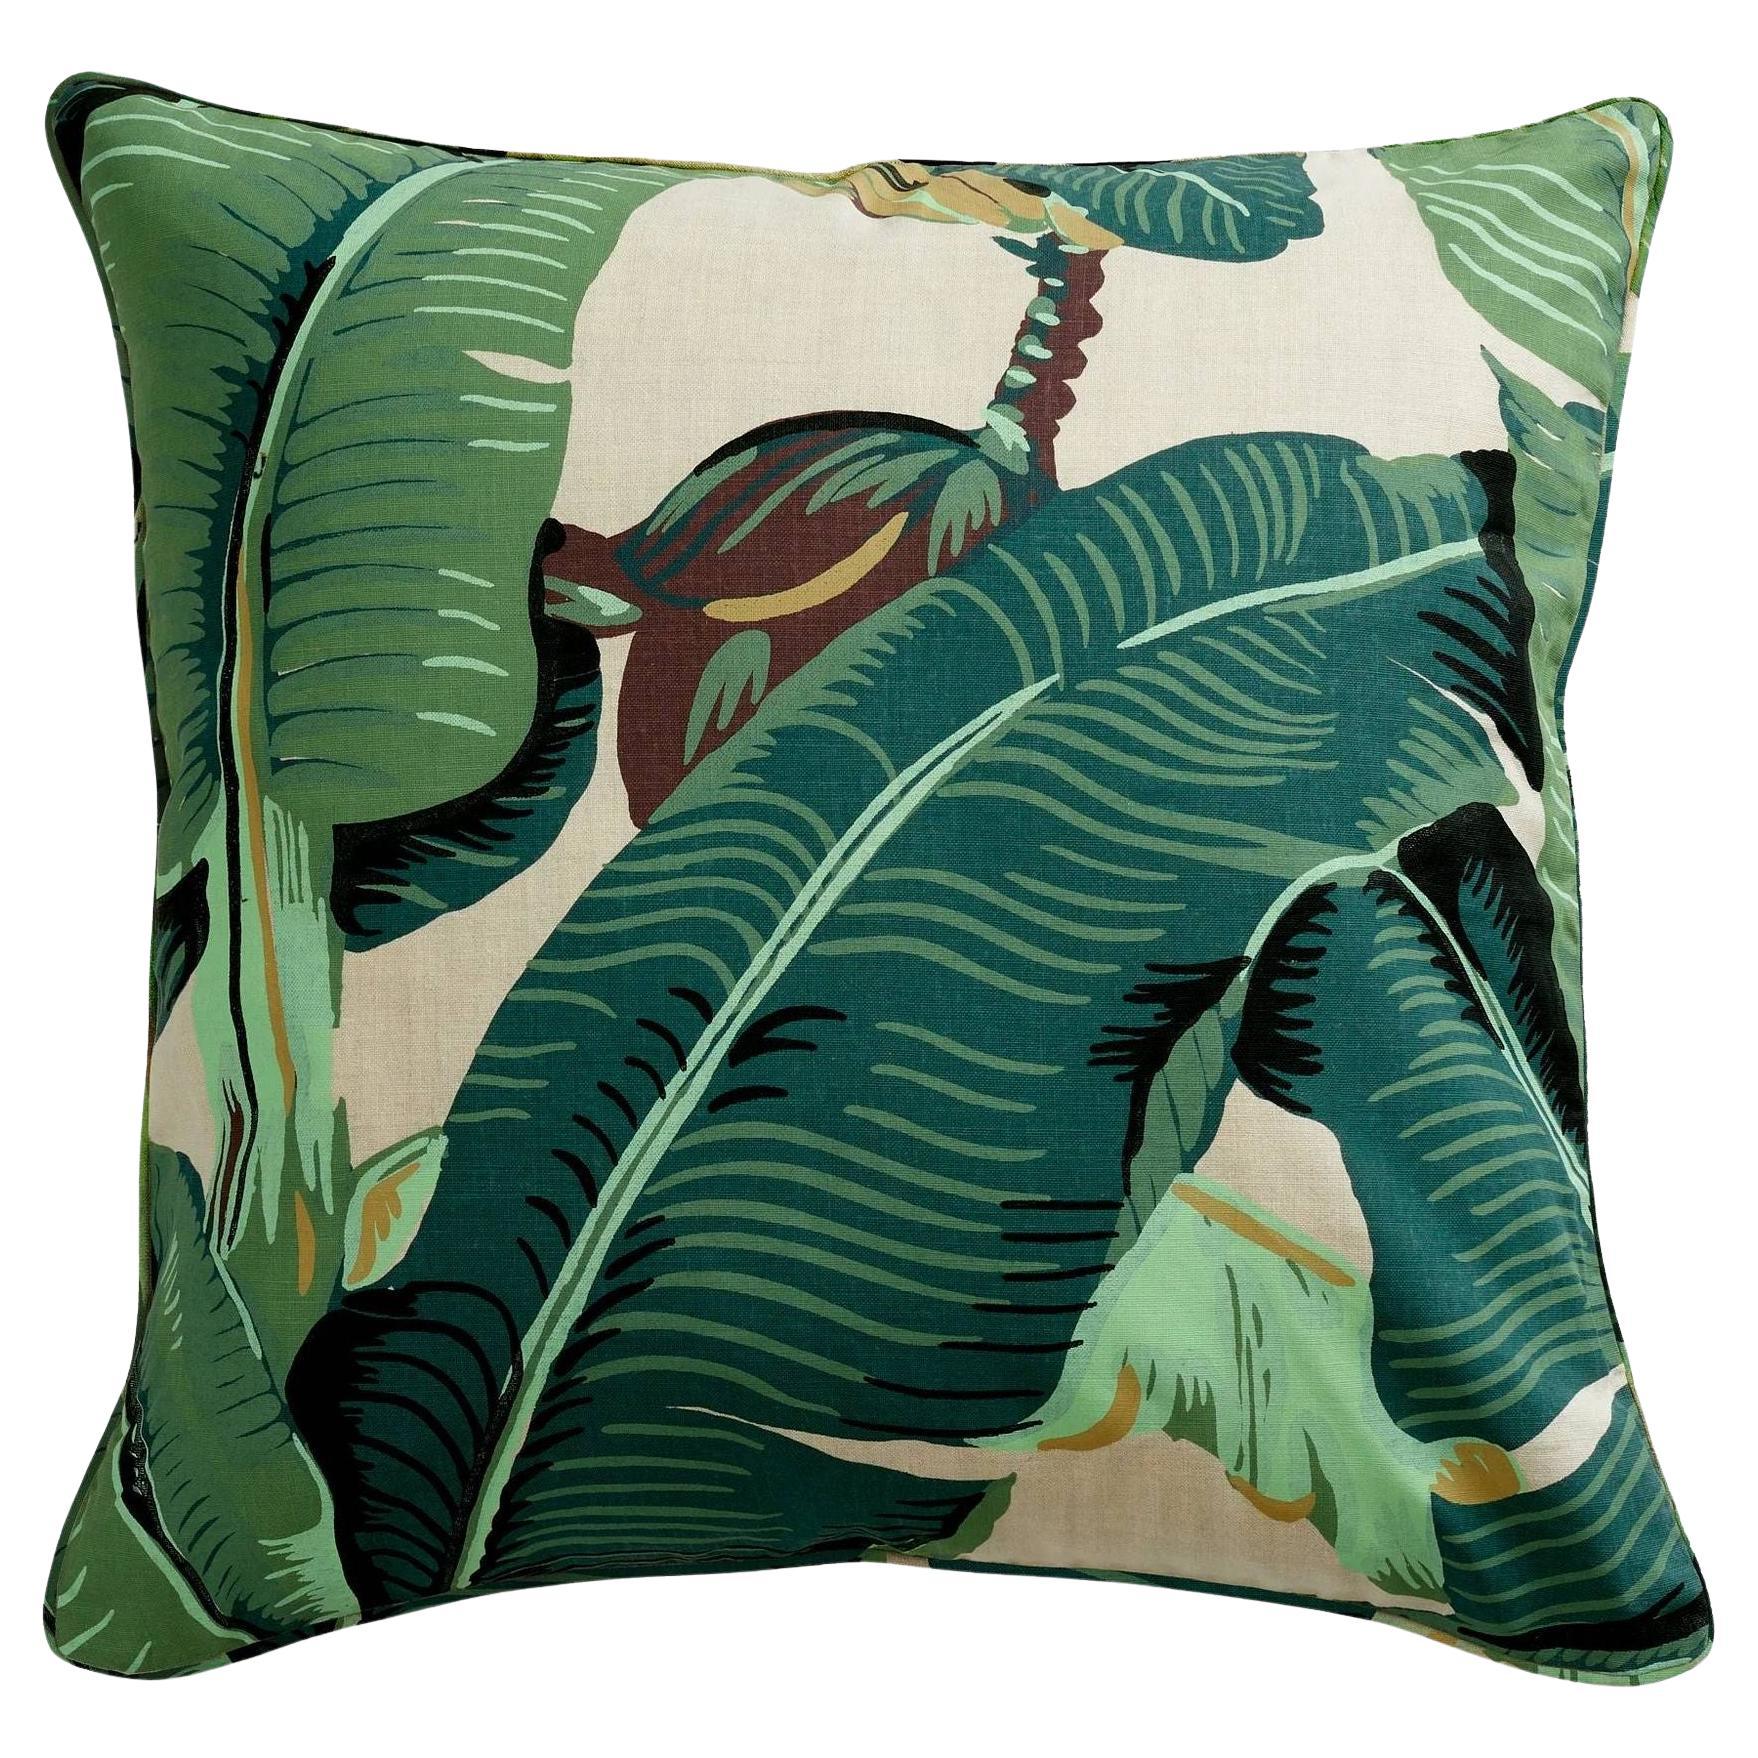 Beverly Hills Hotel Martinique Banana Leaf Throw Pillow For Sale